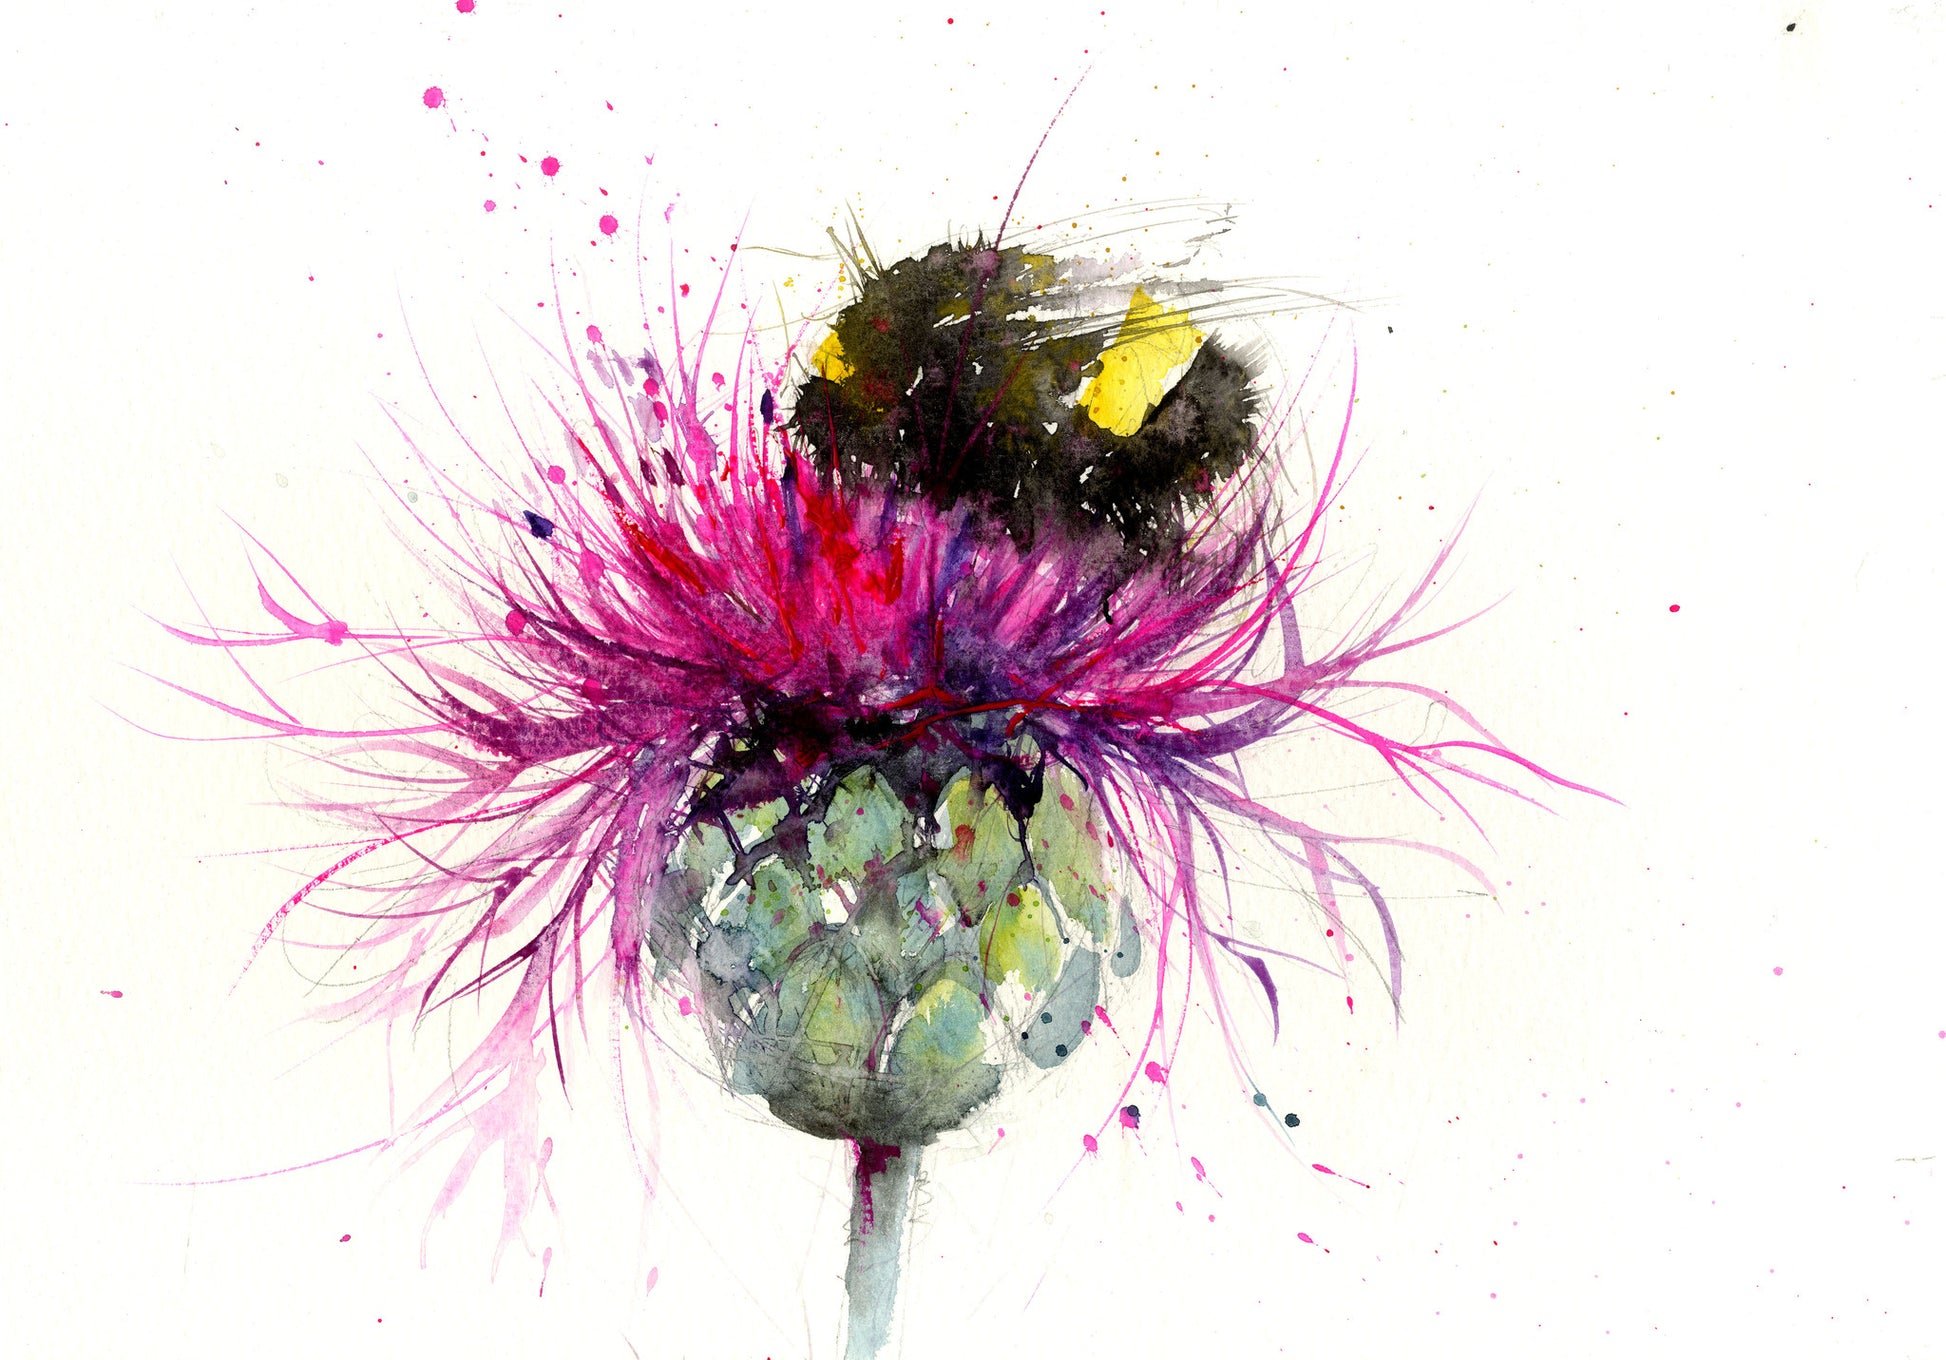 Original watercolour painting 'Bumble bee on a thistle' - Jen Buckley Art limited edition animal art prints